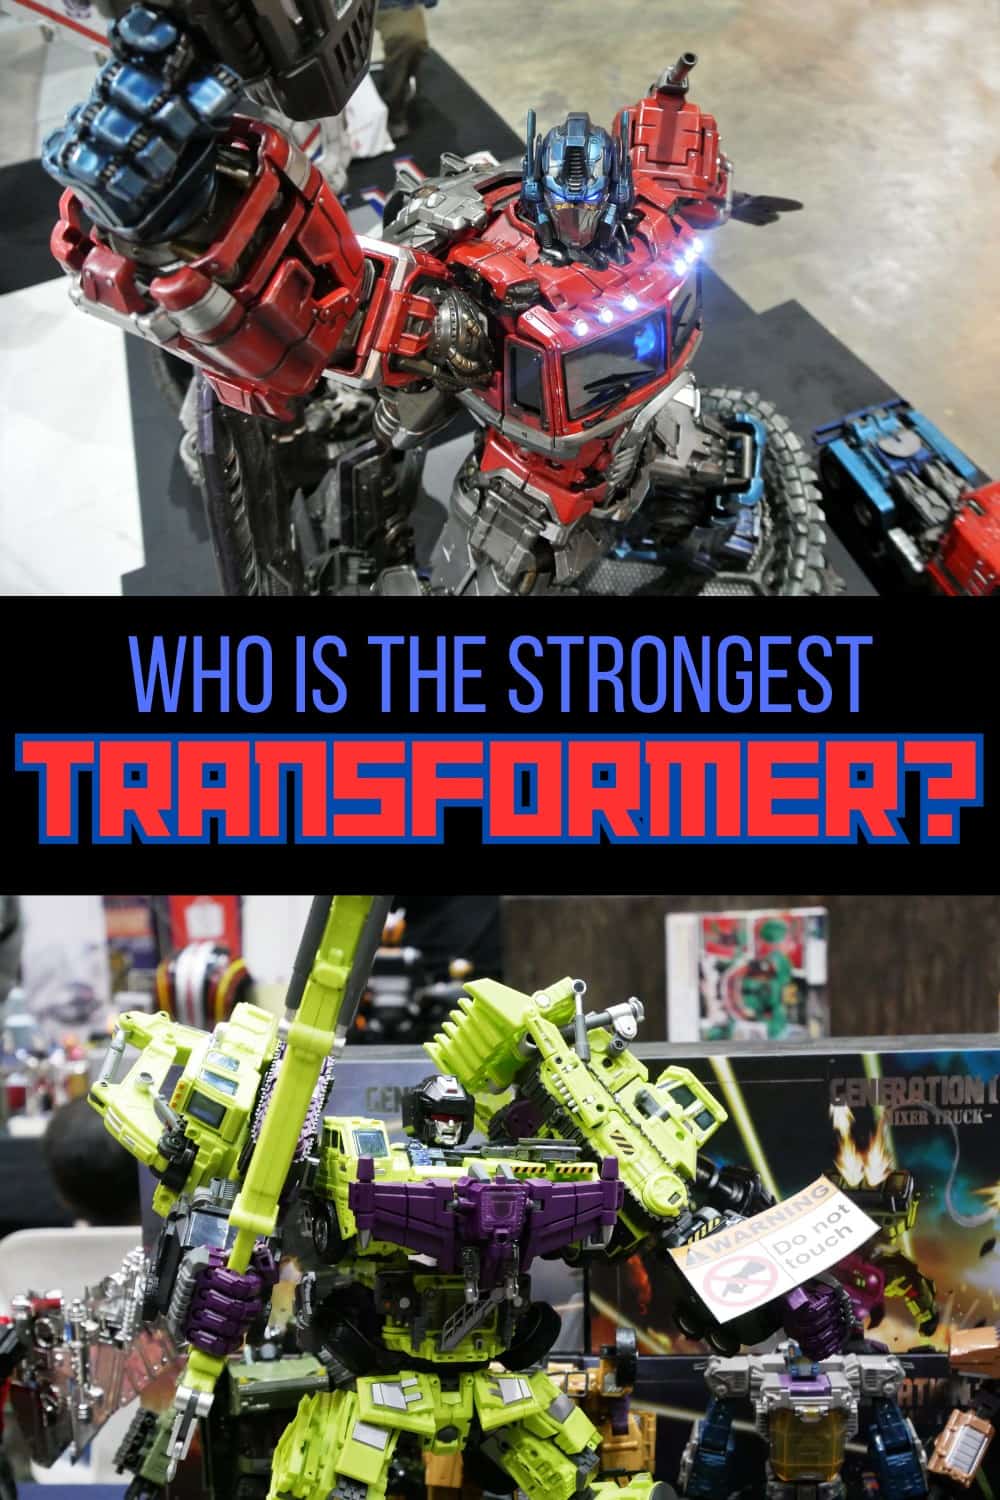 Primus is the most powerful Transformer